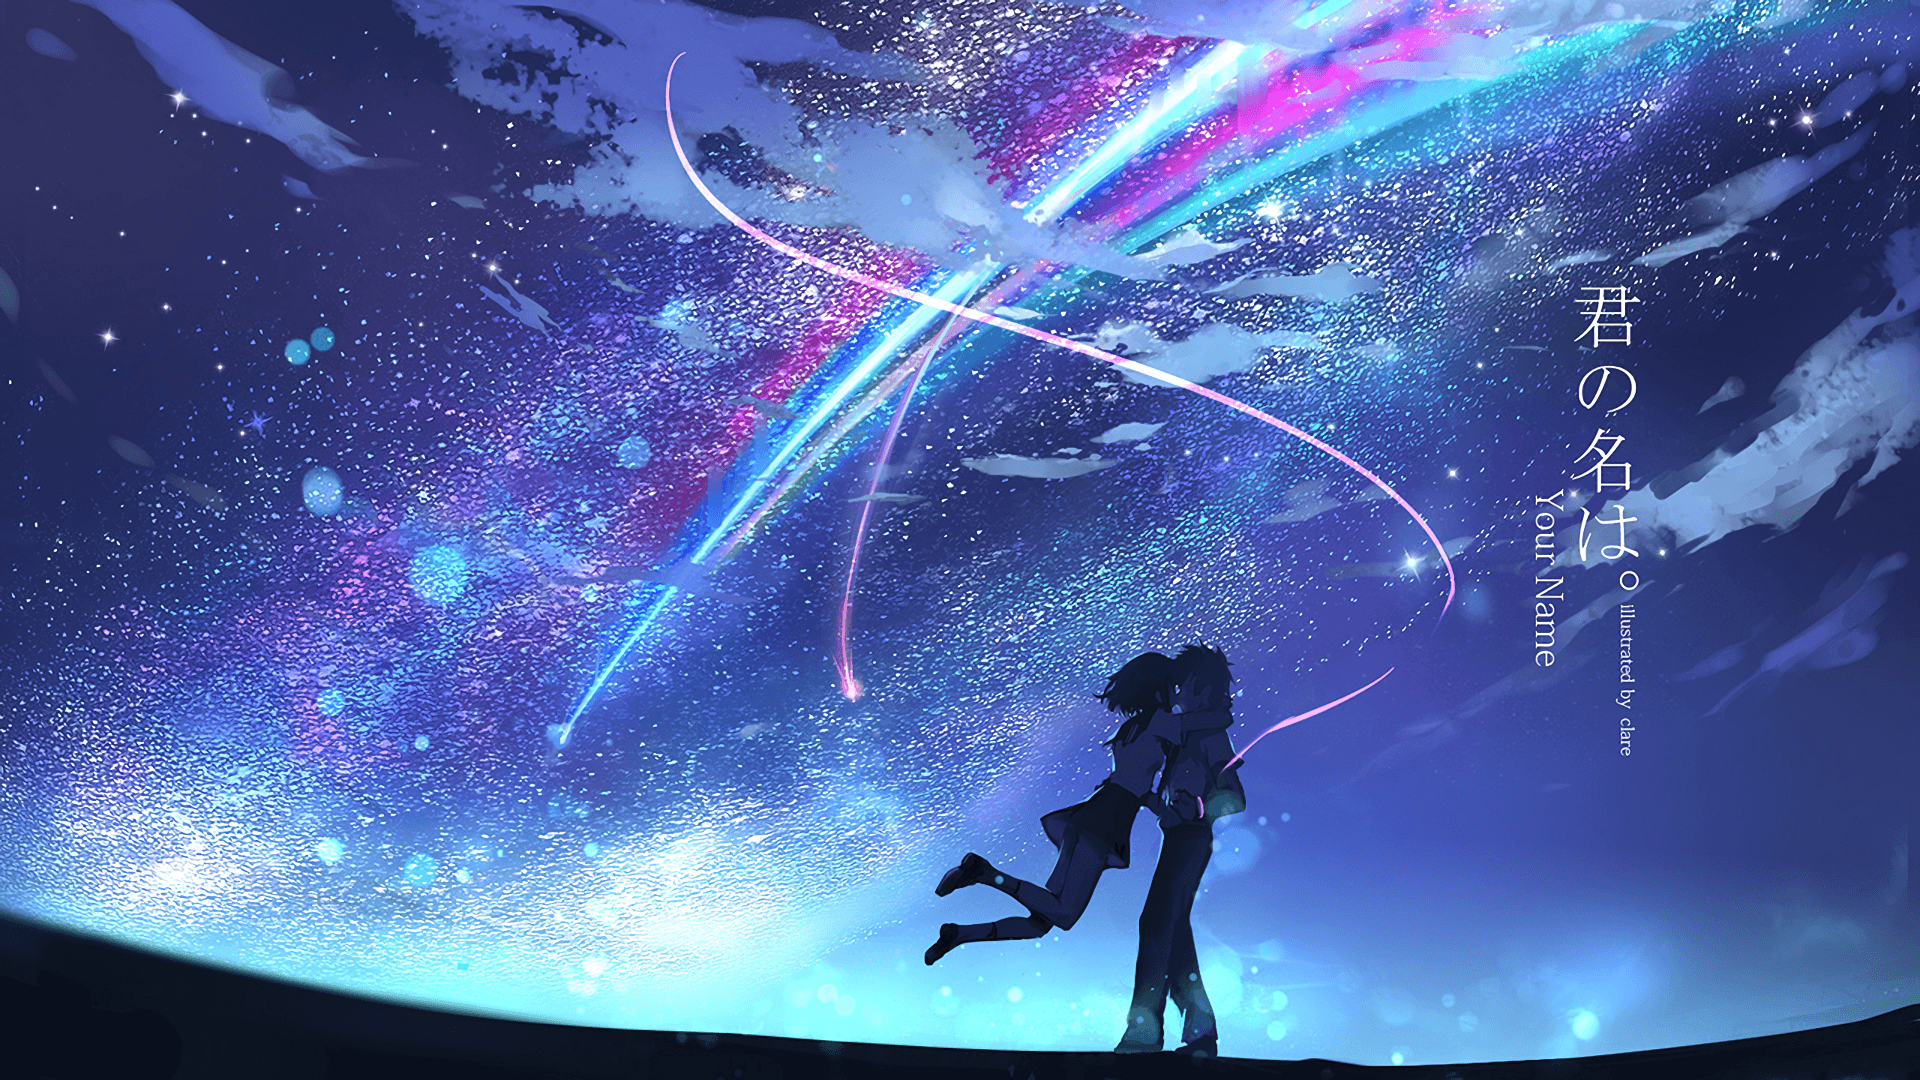 1243 Your Name. HD Wallpapers